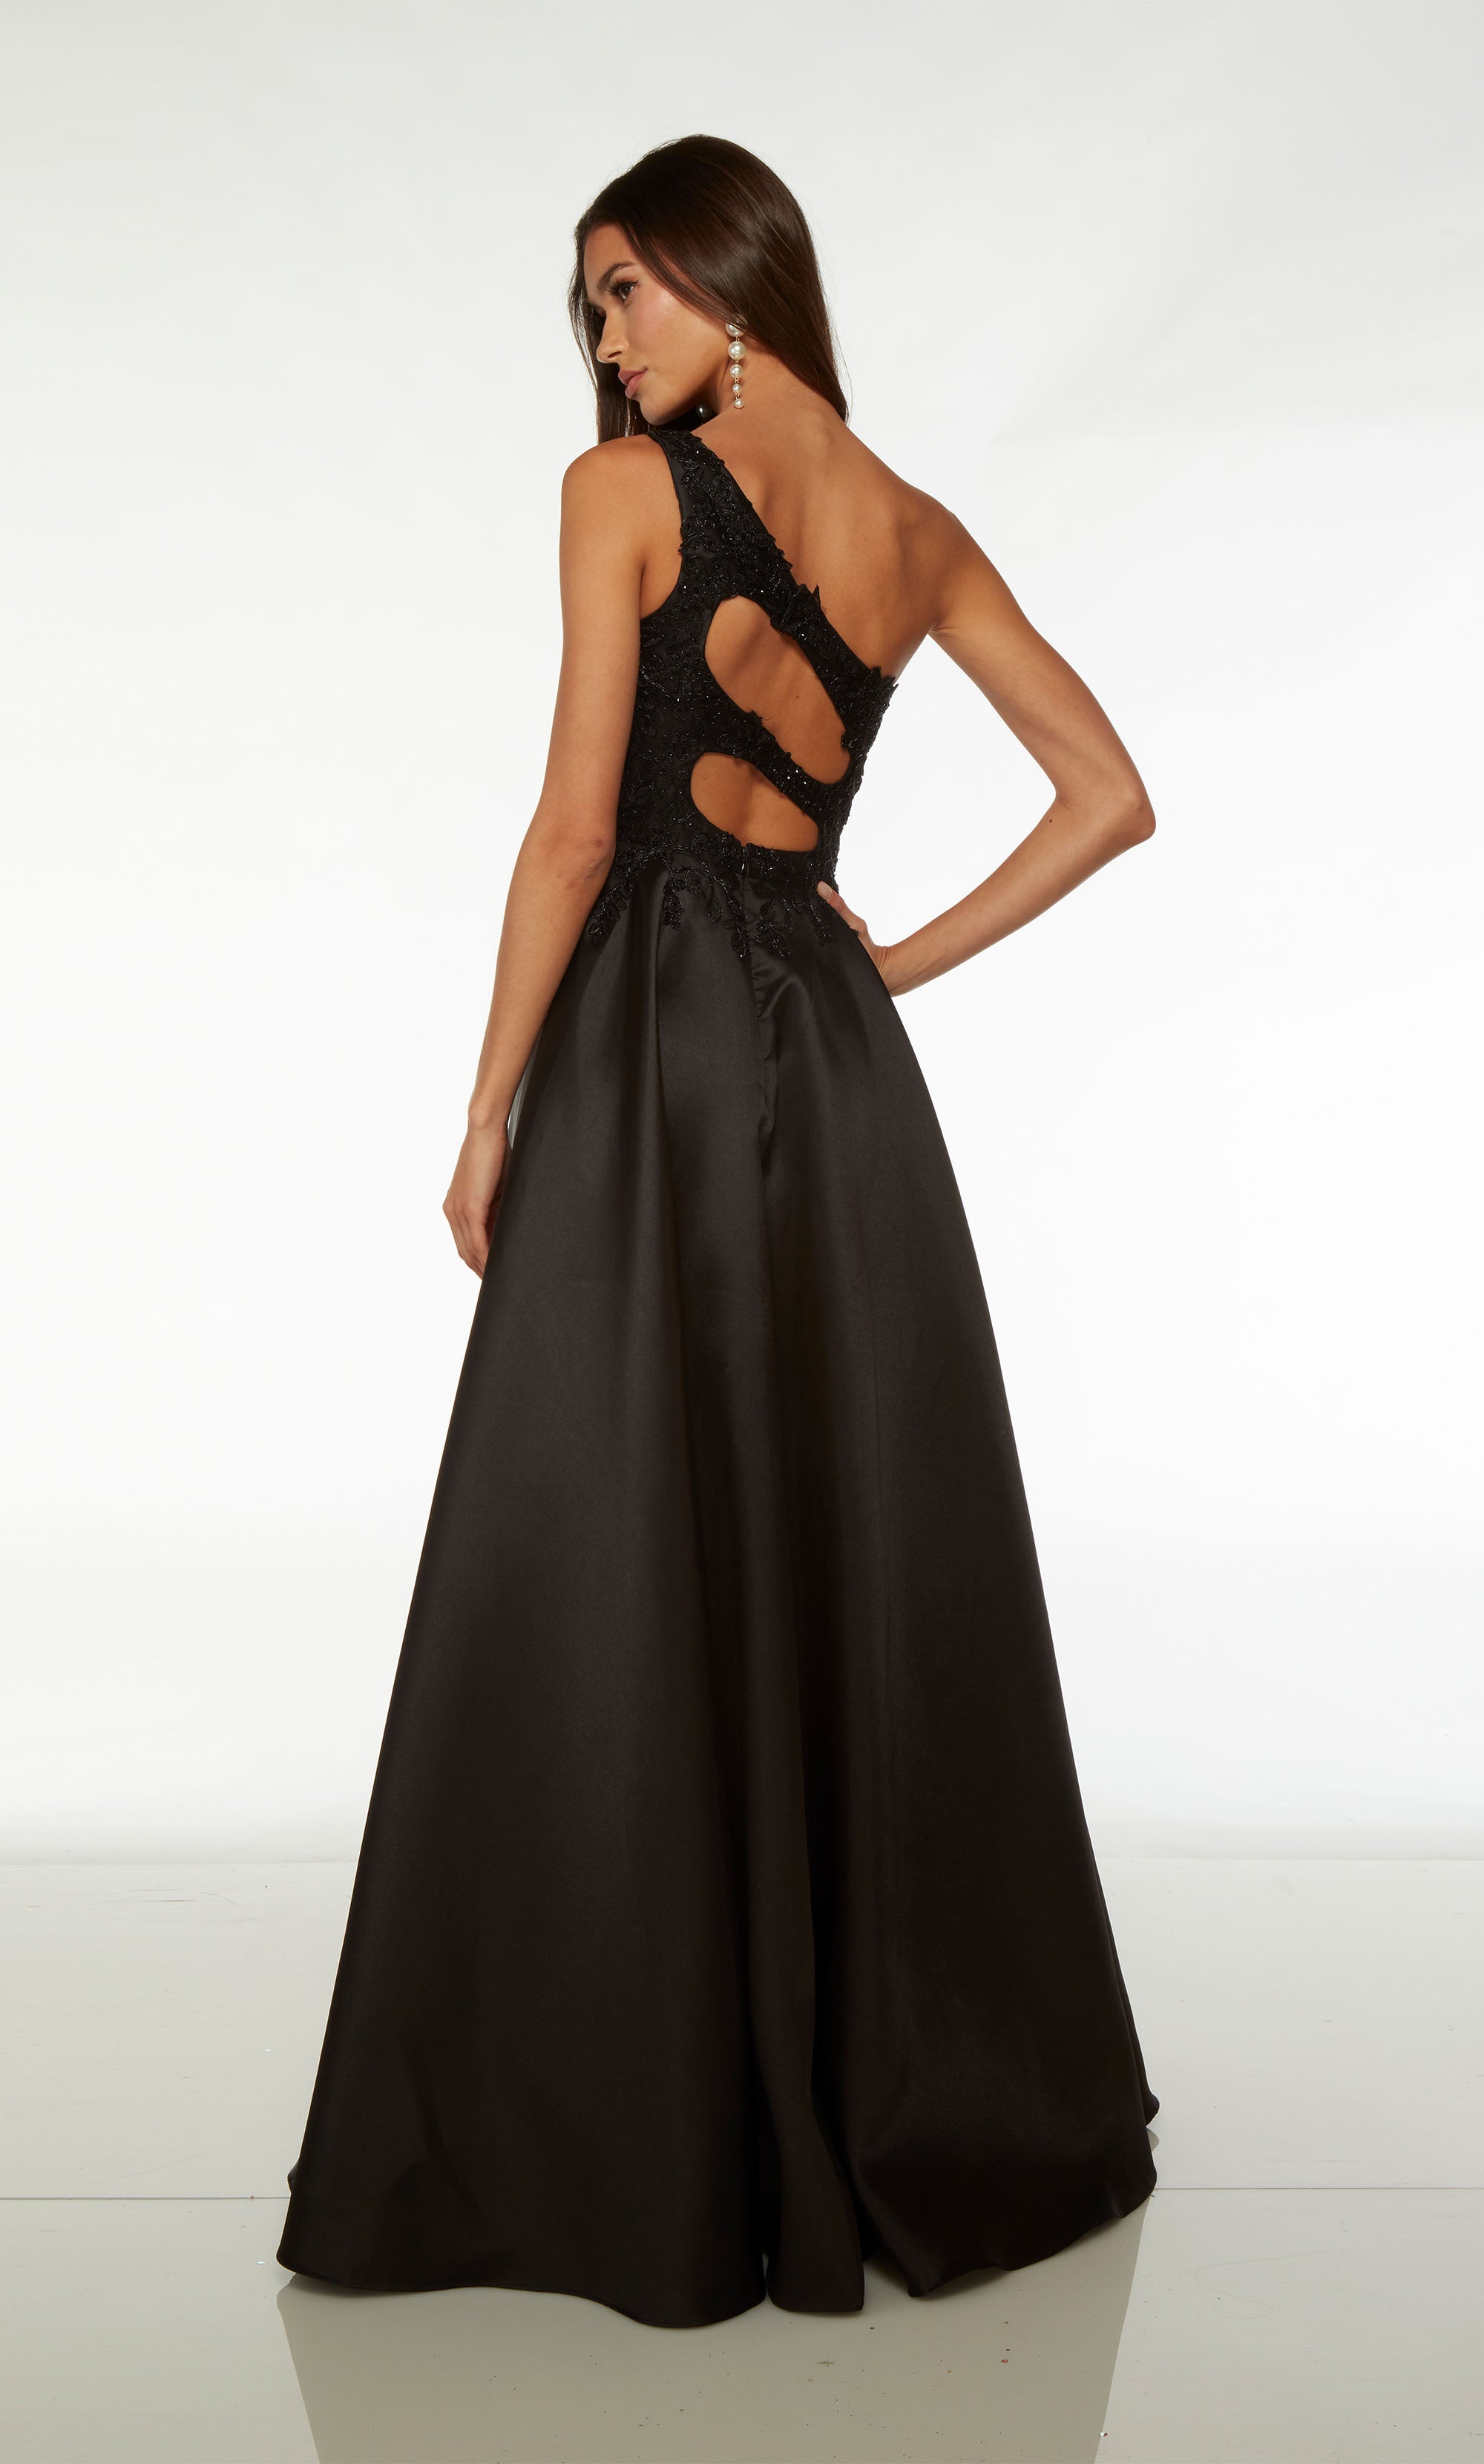 Elegant black prom dress: one-shoulder neckline, lace bodice, A-line mikado skirt with high slit, and an cutout back for an stylish touch.